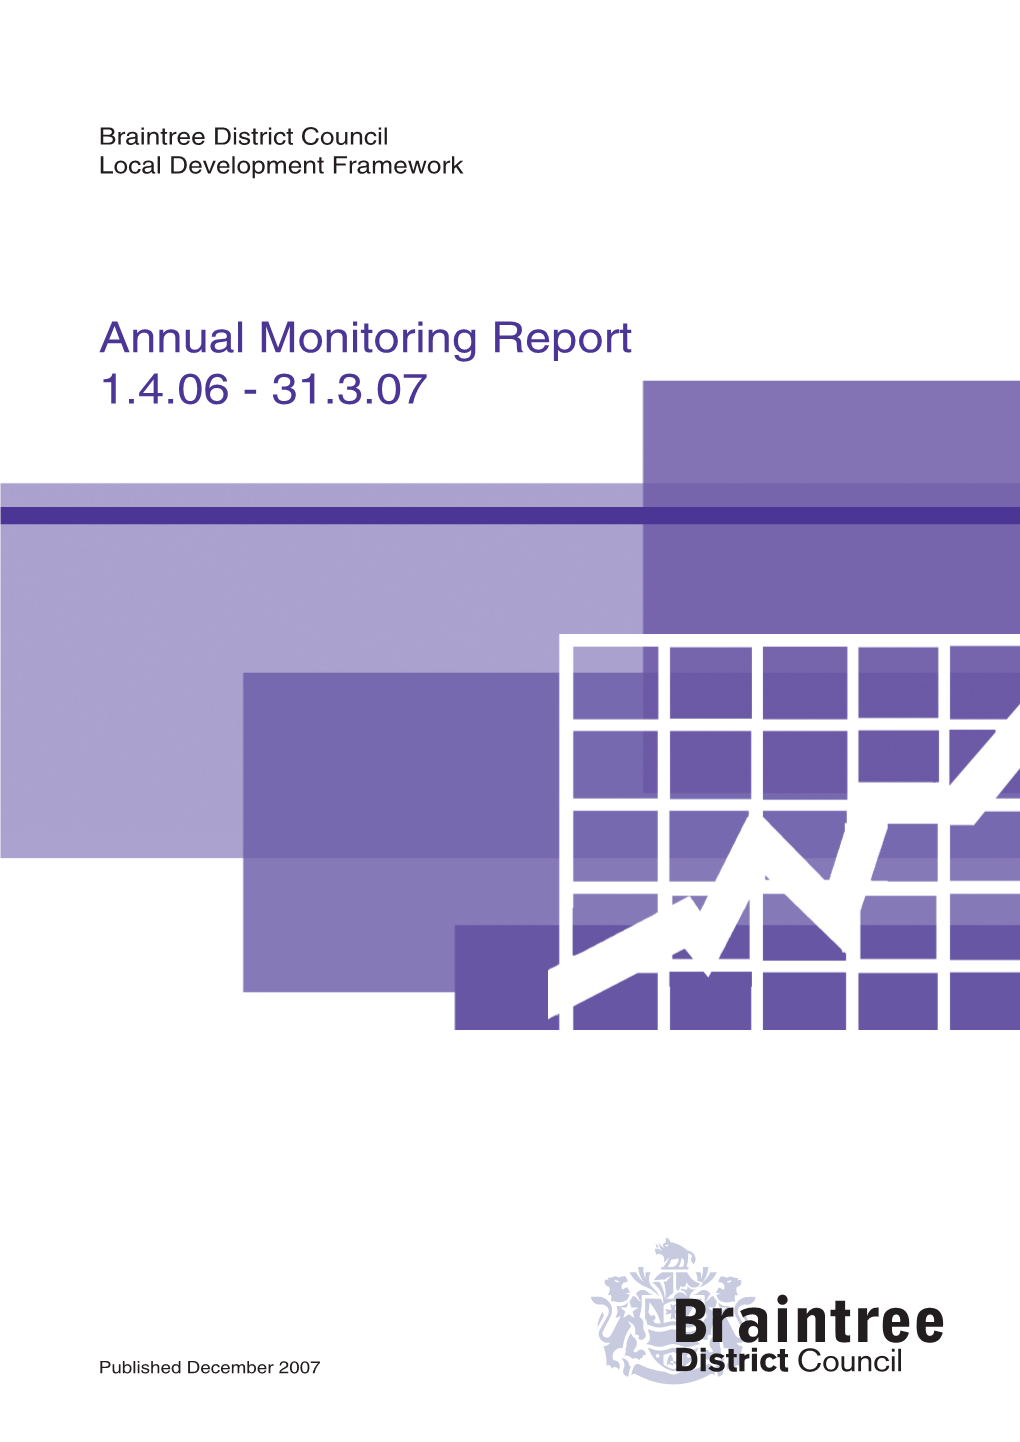 Annual Monitoring Report 1.4.06 - 31.3.07